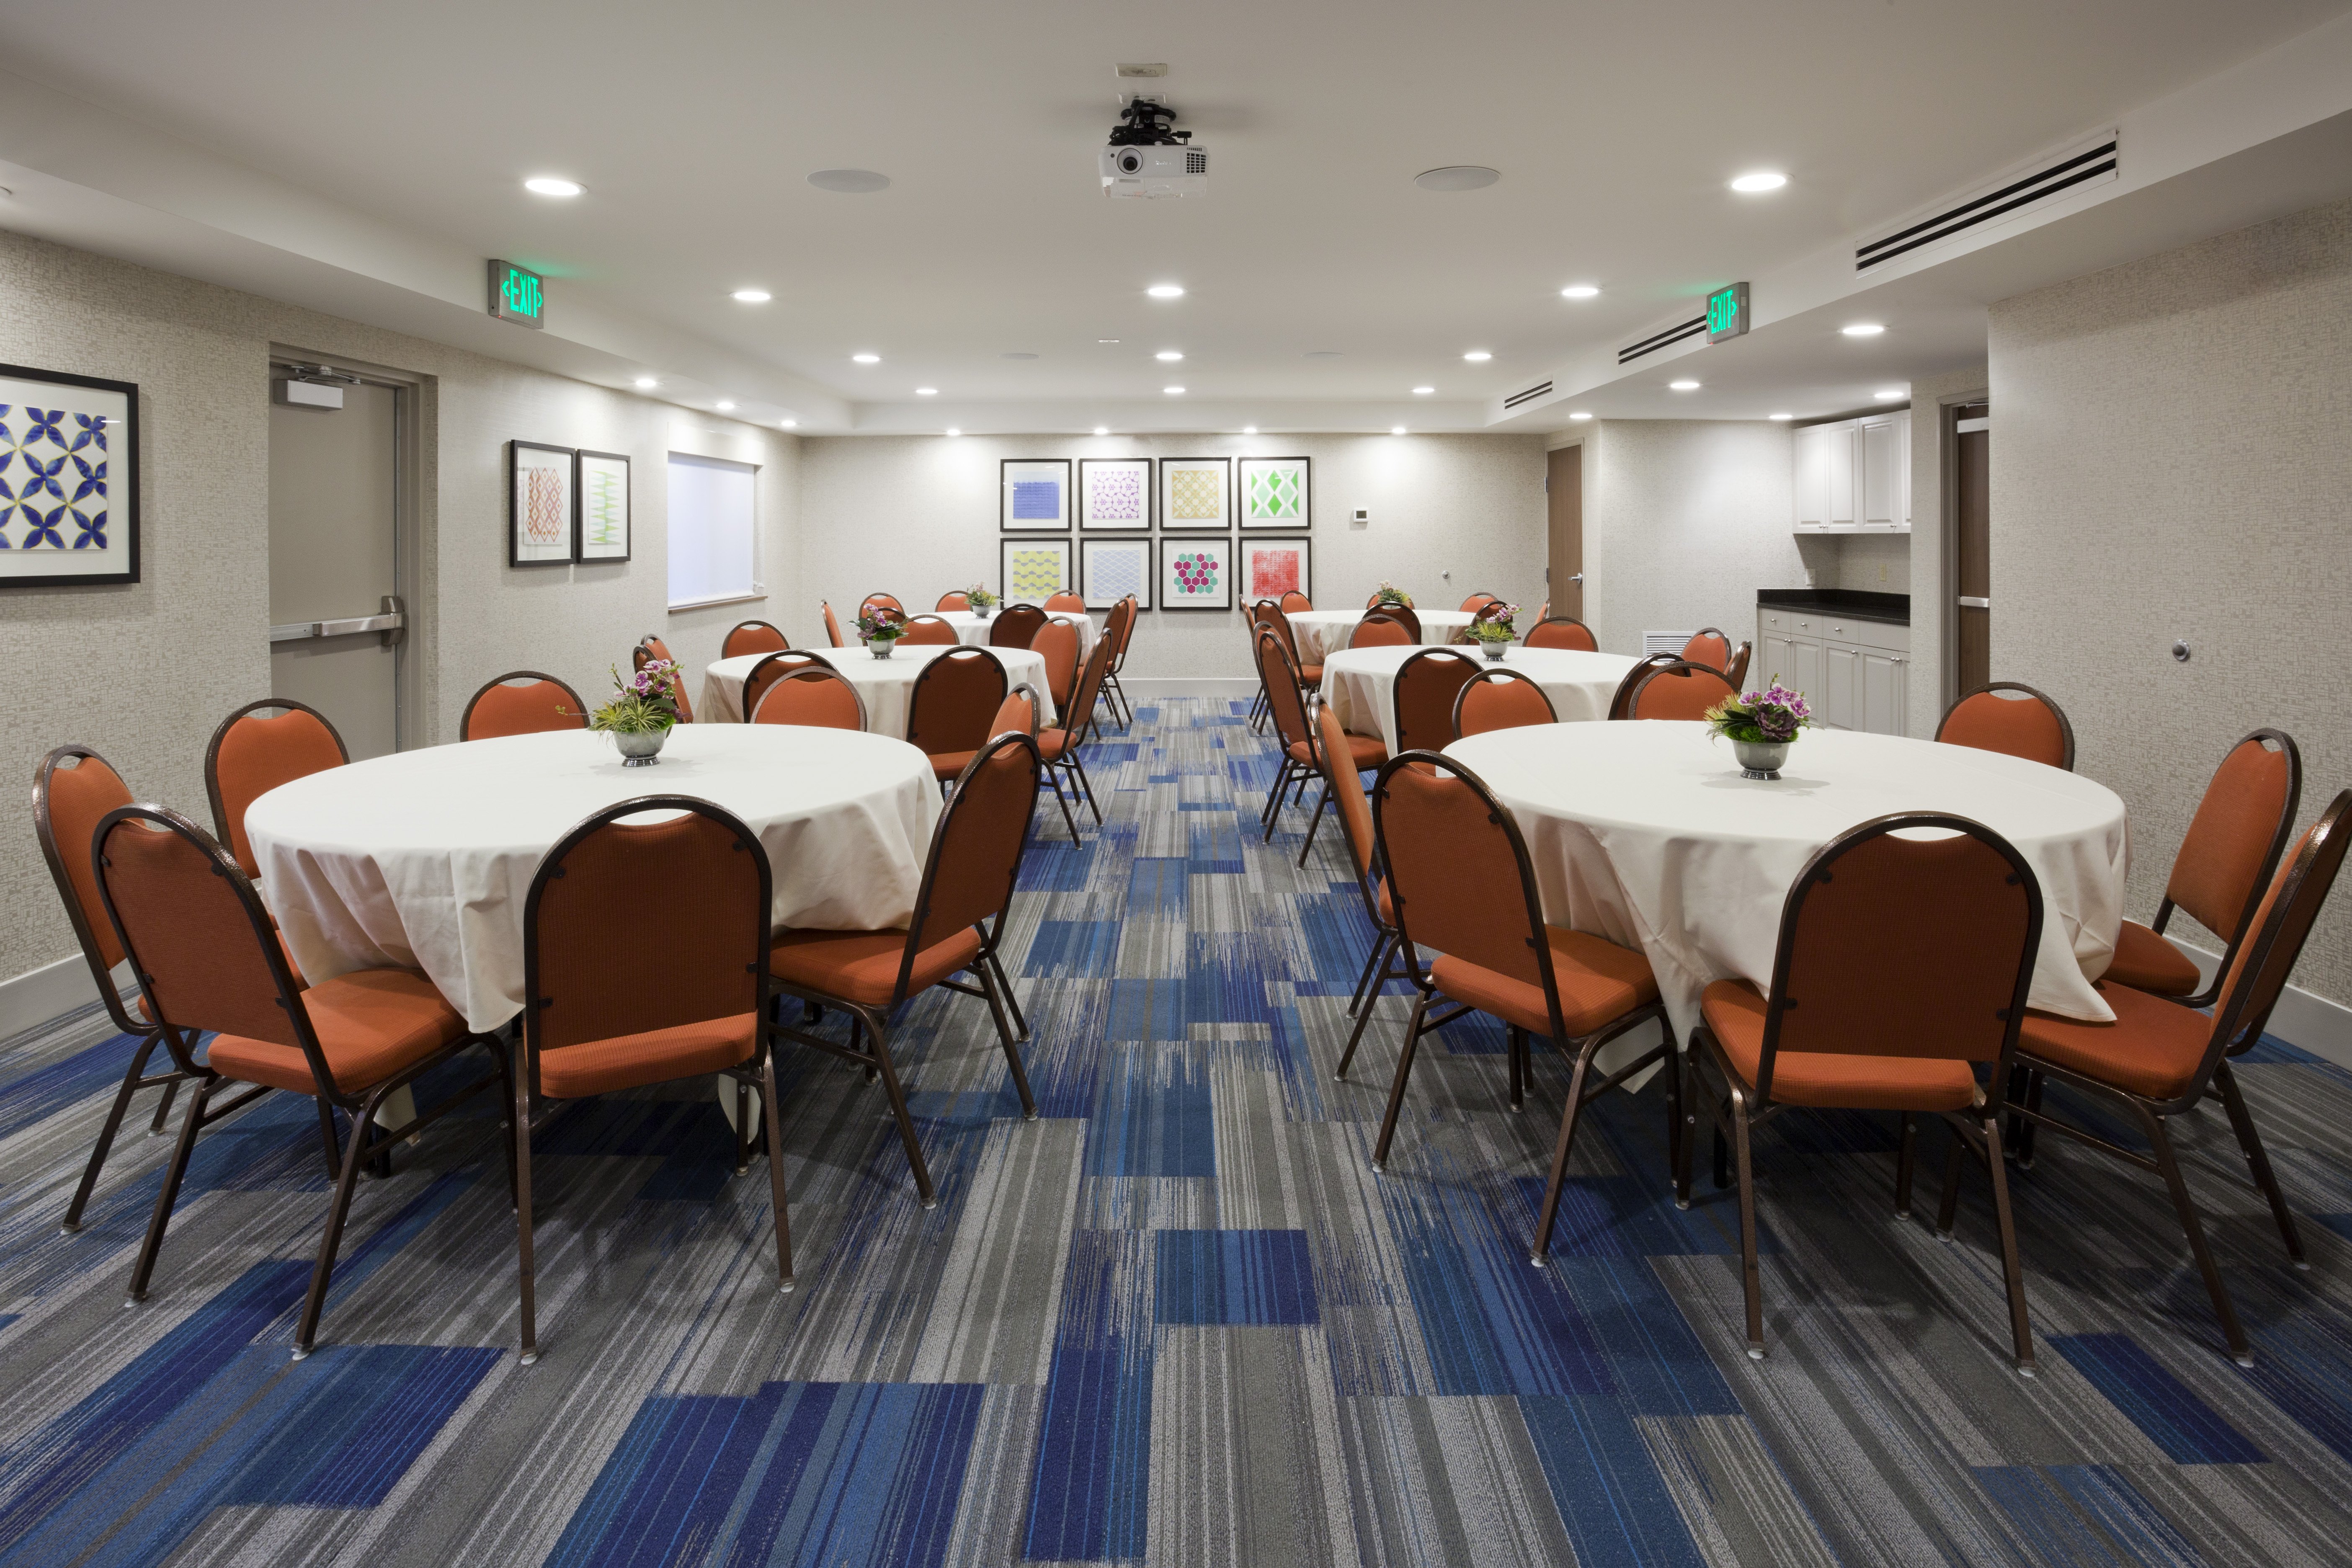 Flexible meeting space for up to 50 attendees near Minneapolis.